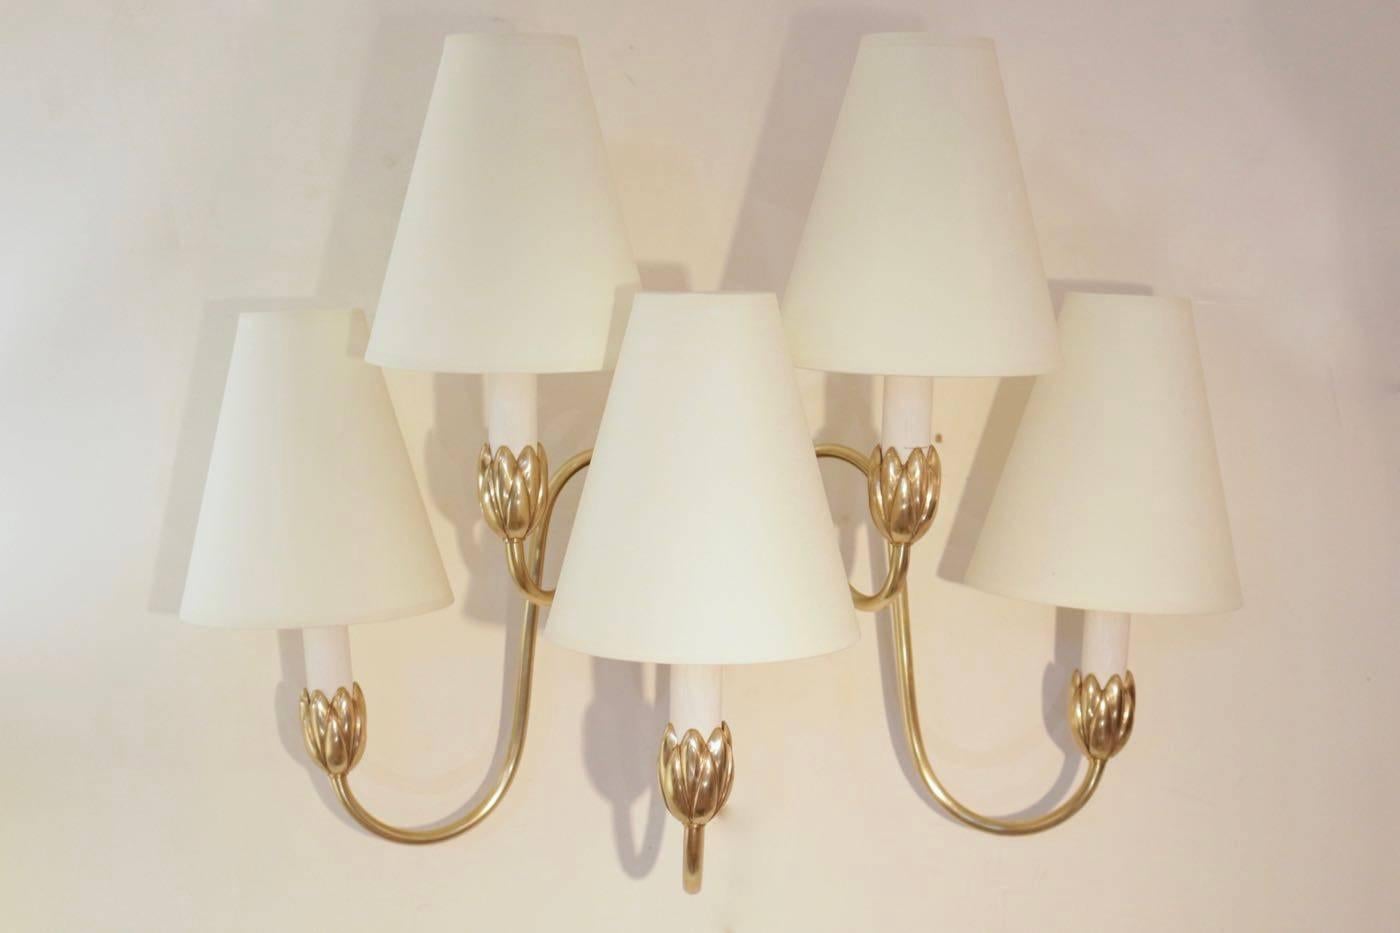 1960s pair of large brass Maison Honoré sconces.

All made of brass, five curved arms ended by five handmade off-white cotton lampshades. 

Five bulbs per sconces.
 